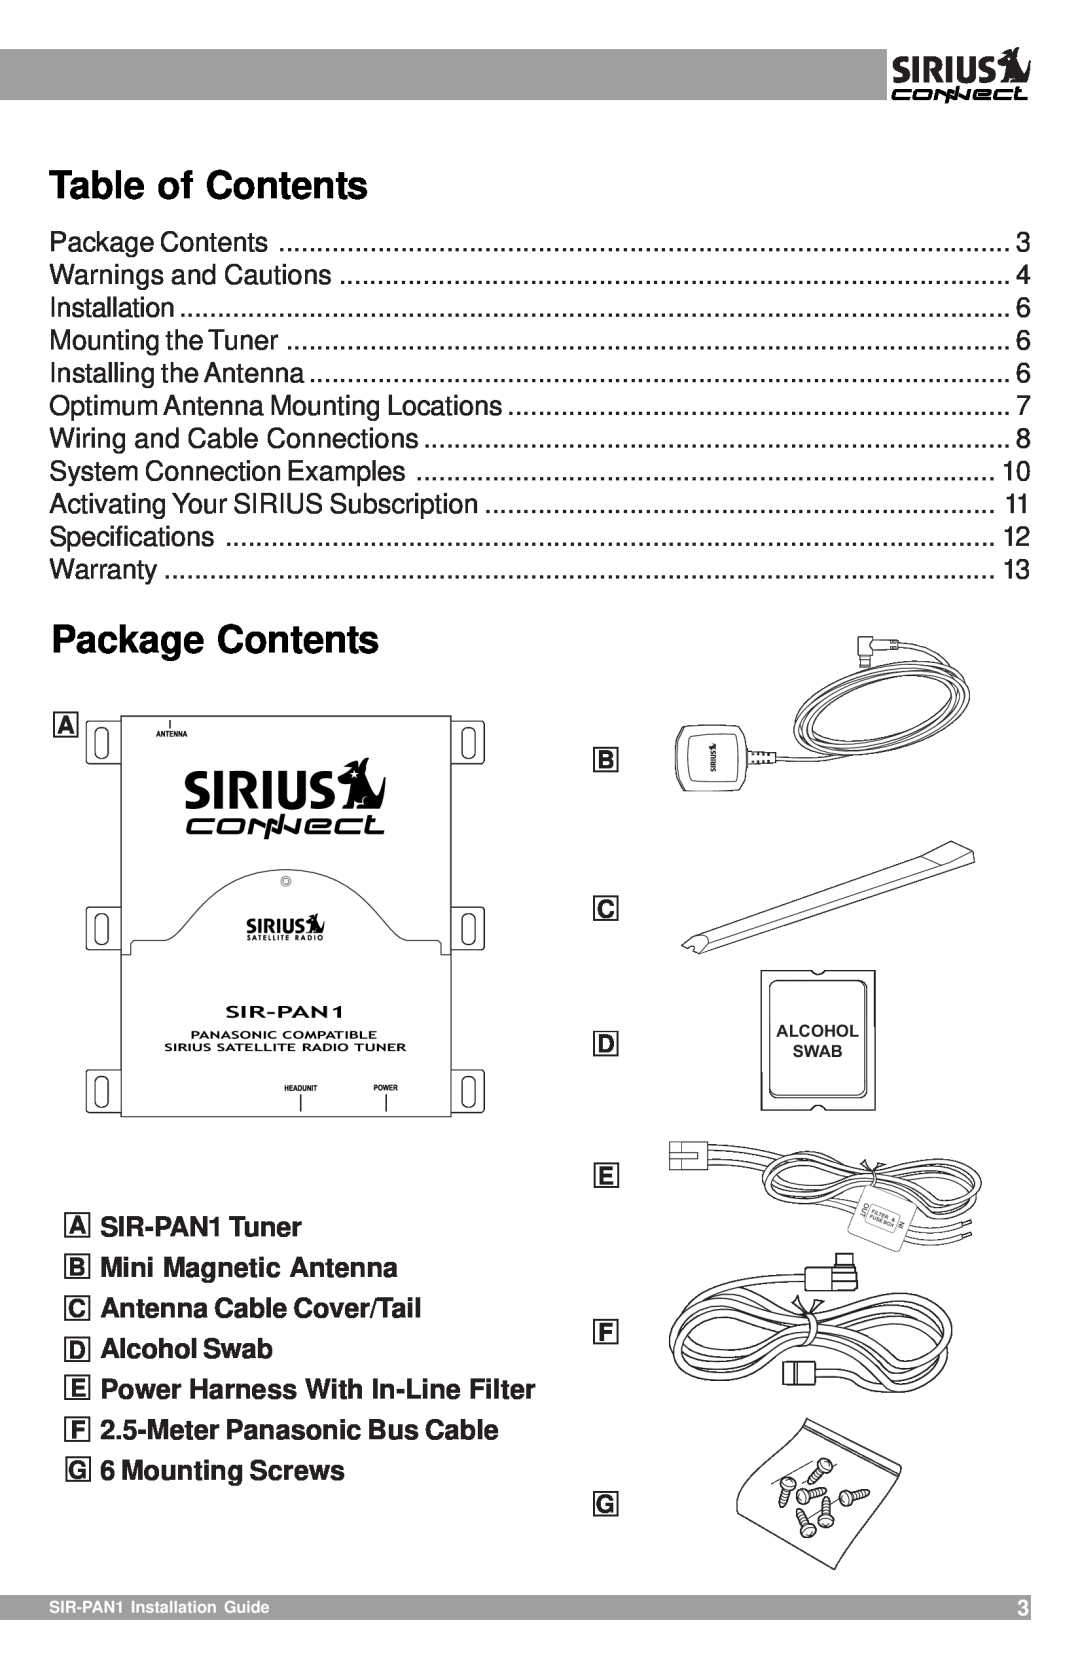 Sirius Satellite Radio manual Table of Contents, Package Contents, ASIR-PAN1Tuner BMini Magnetic Antenna 